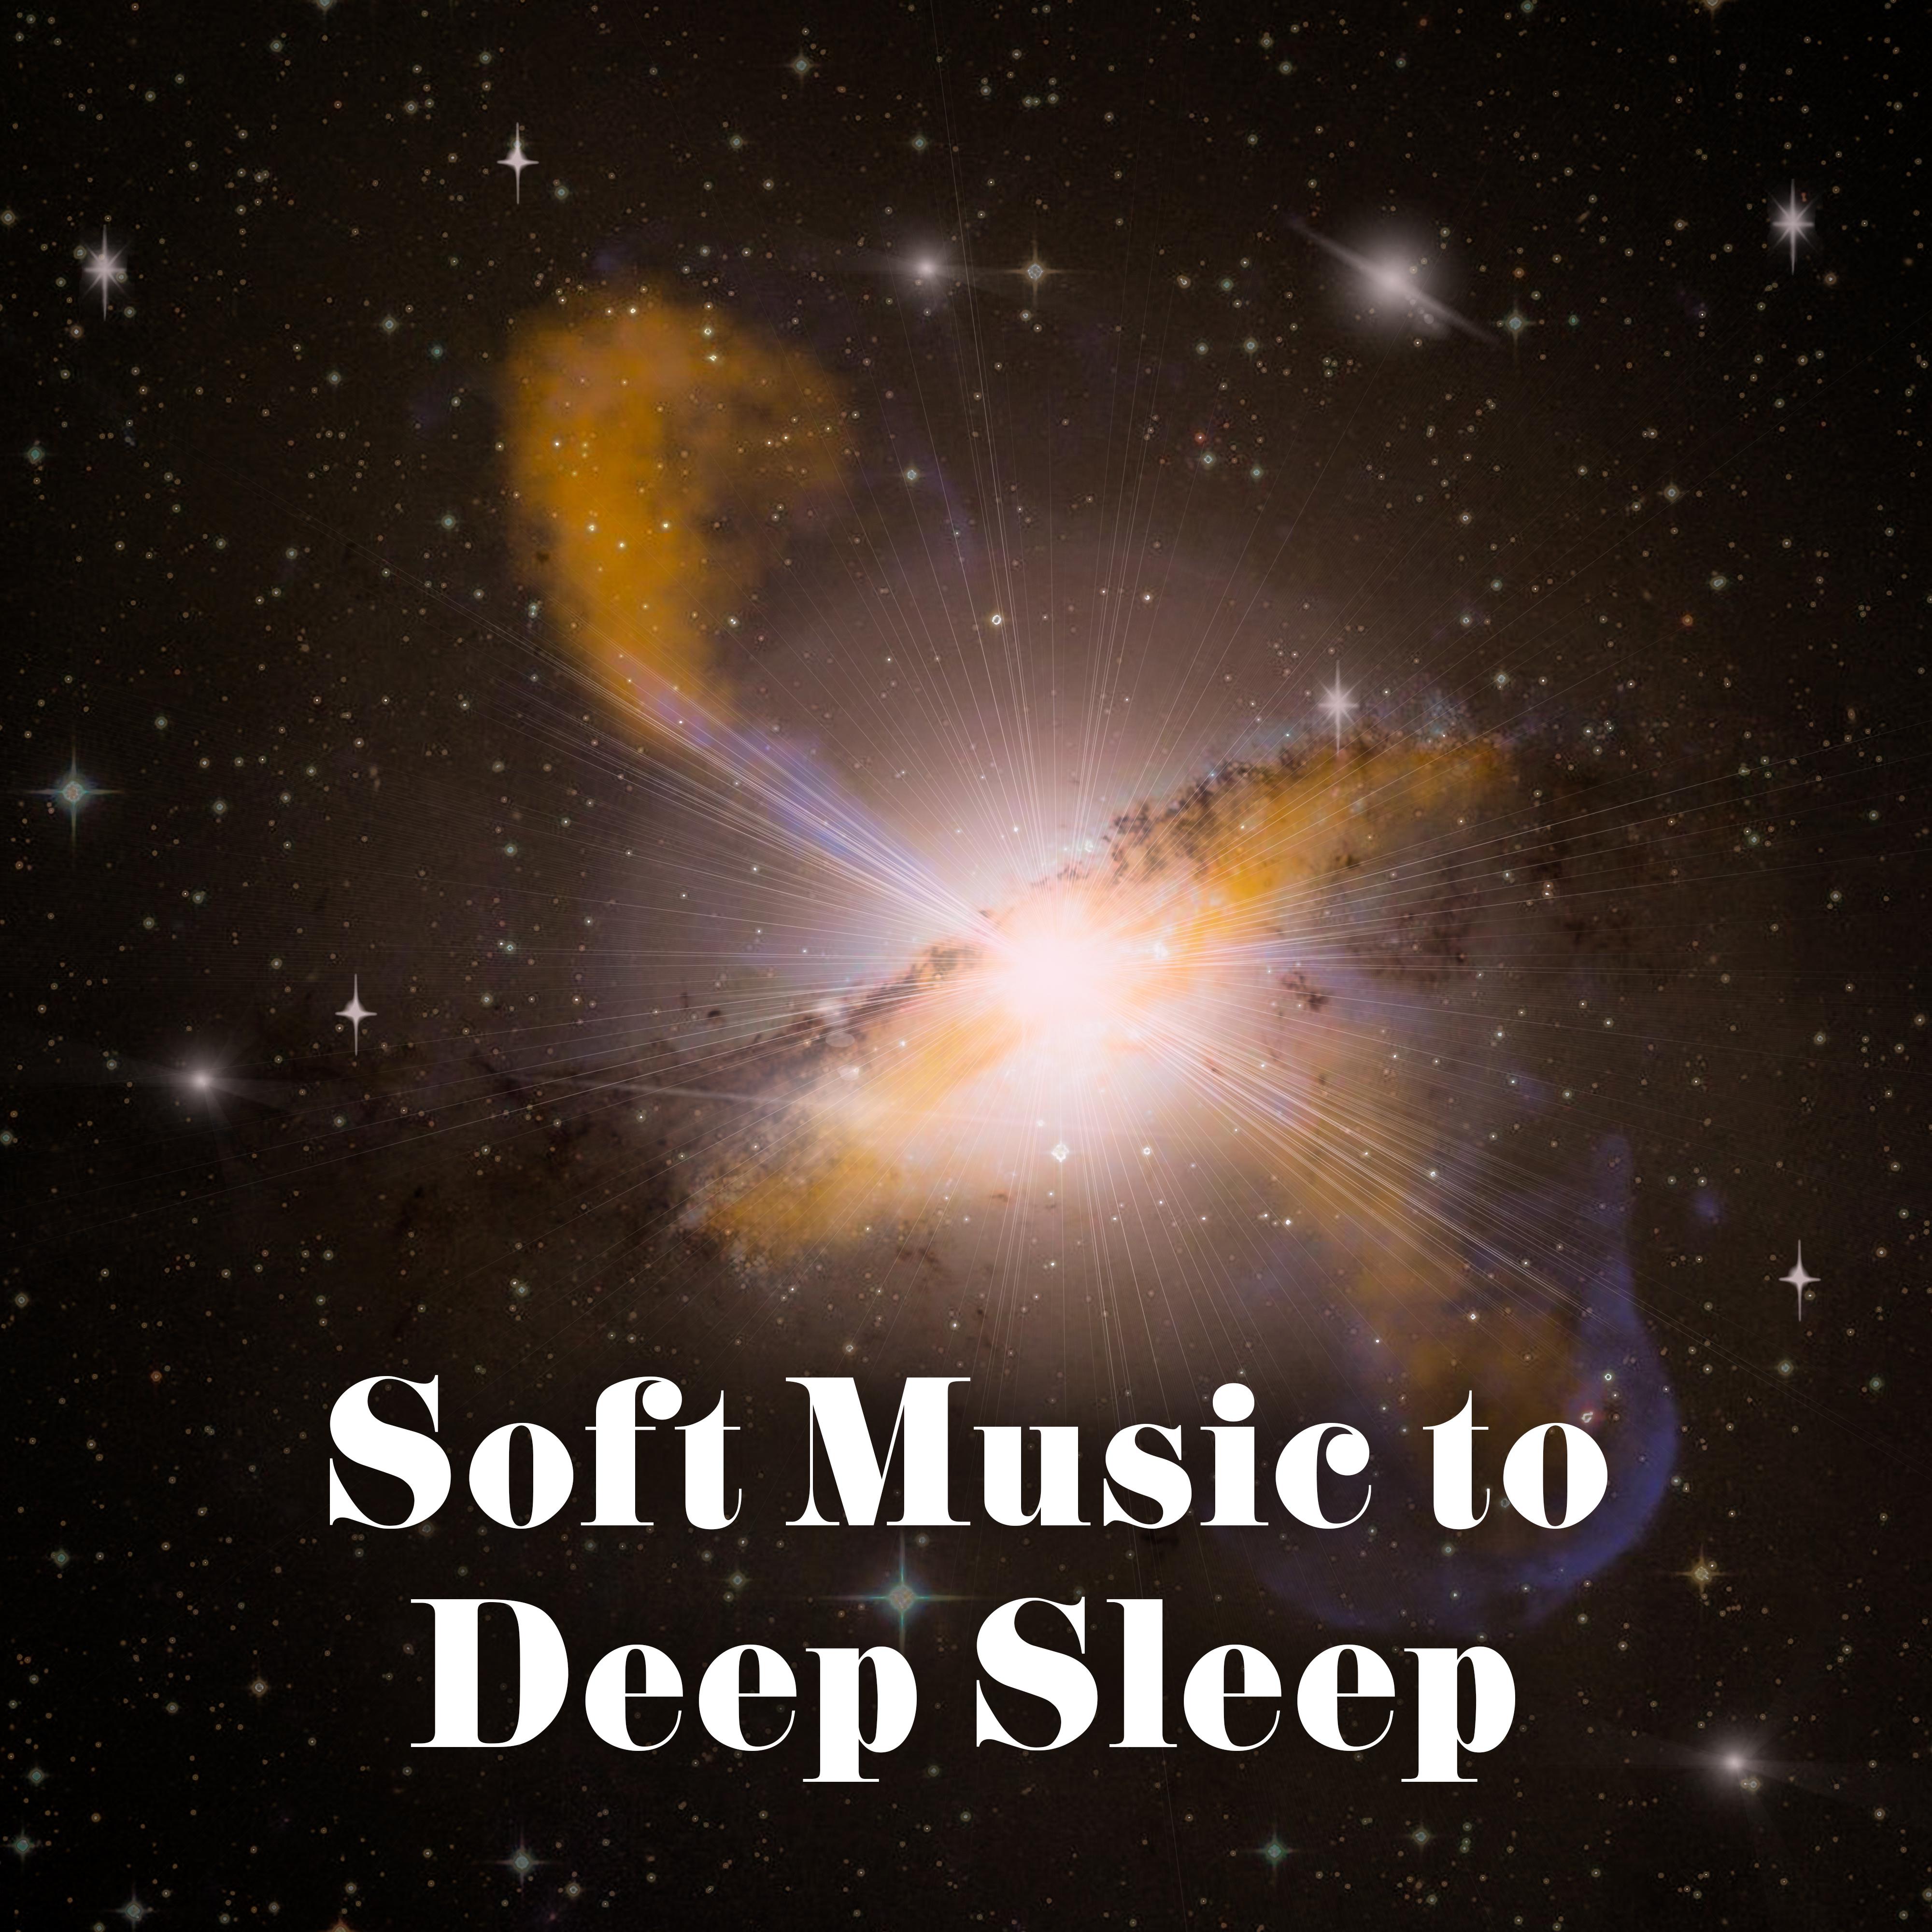 Soft Music to Deep Sleep – Relaxing New Age Music, Sleeping Hours, Stress Relief, Dreaming Time